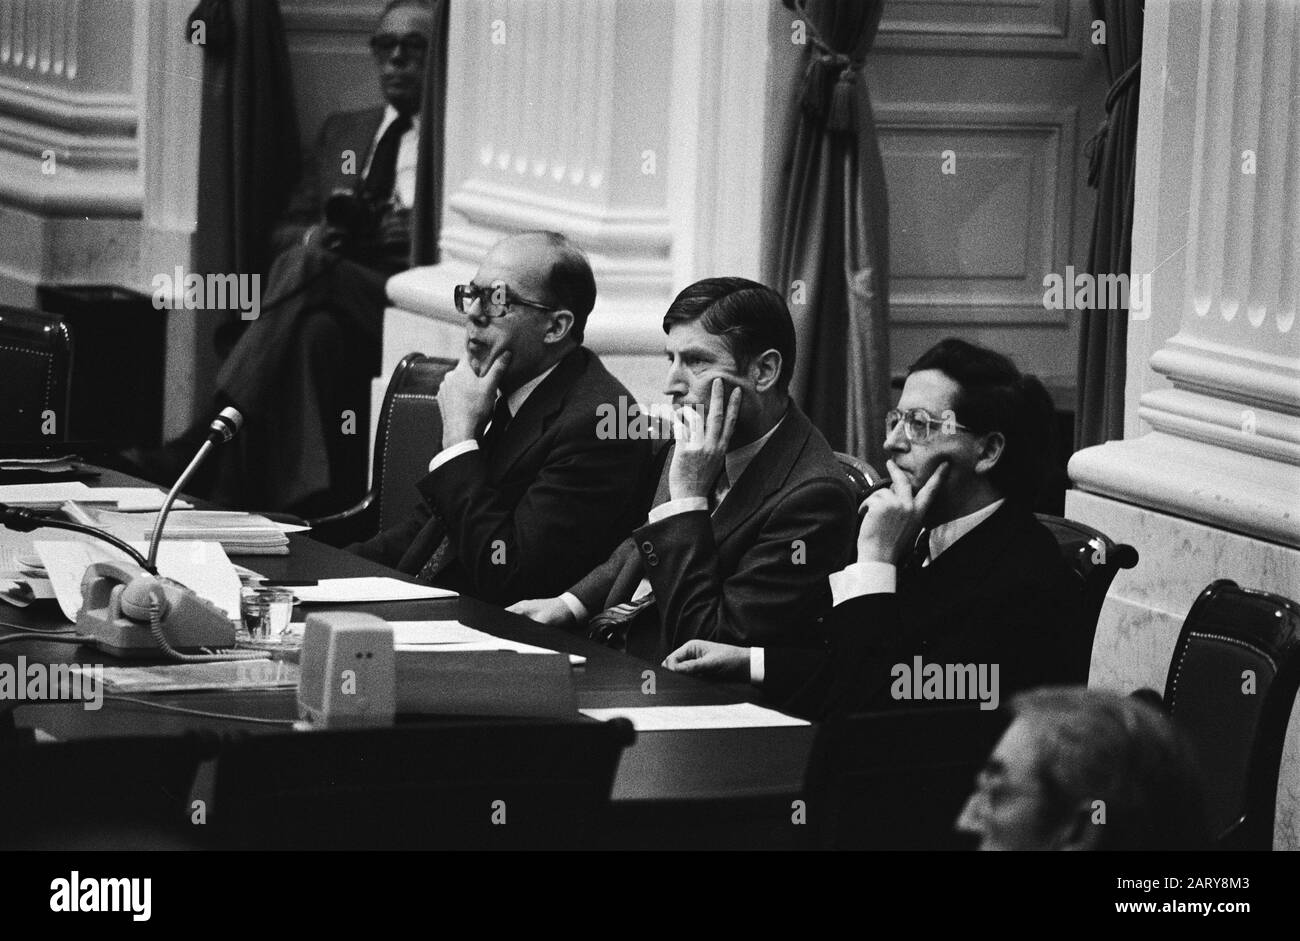 Second Chamber, debate on Aantjes case; from l.n.r. minister De Ruiter, premier Van Agt and minister Pais Date: 16 November 1978 Keywords: political Person name: Pais, Arie, Ruiter, Job de Stock Photo